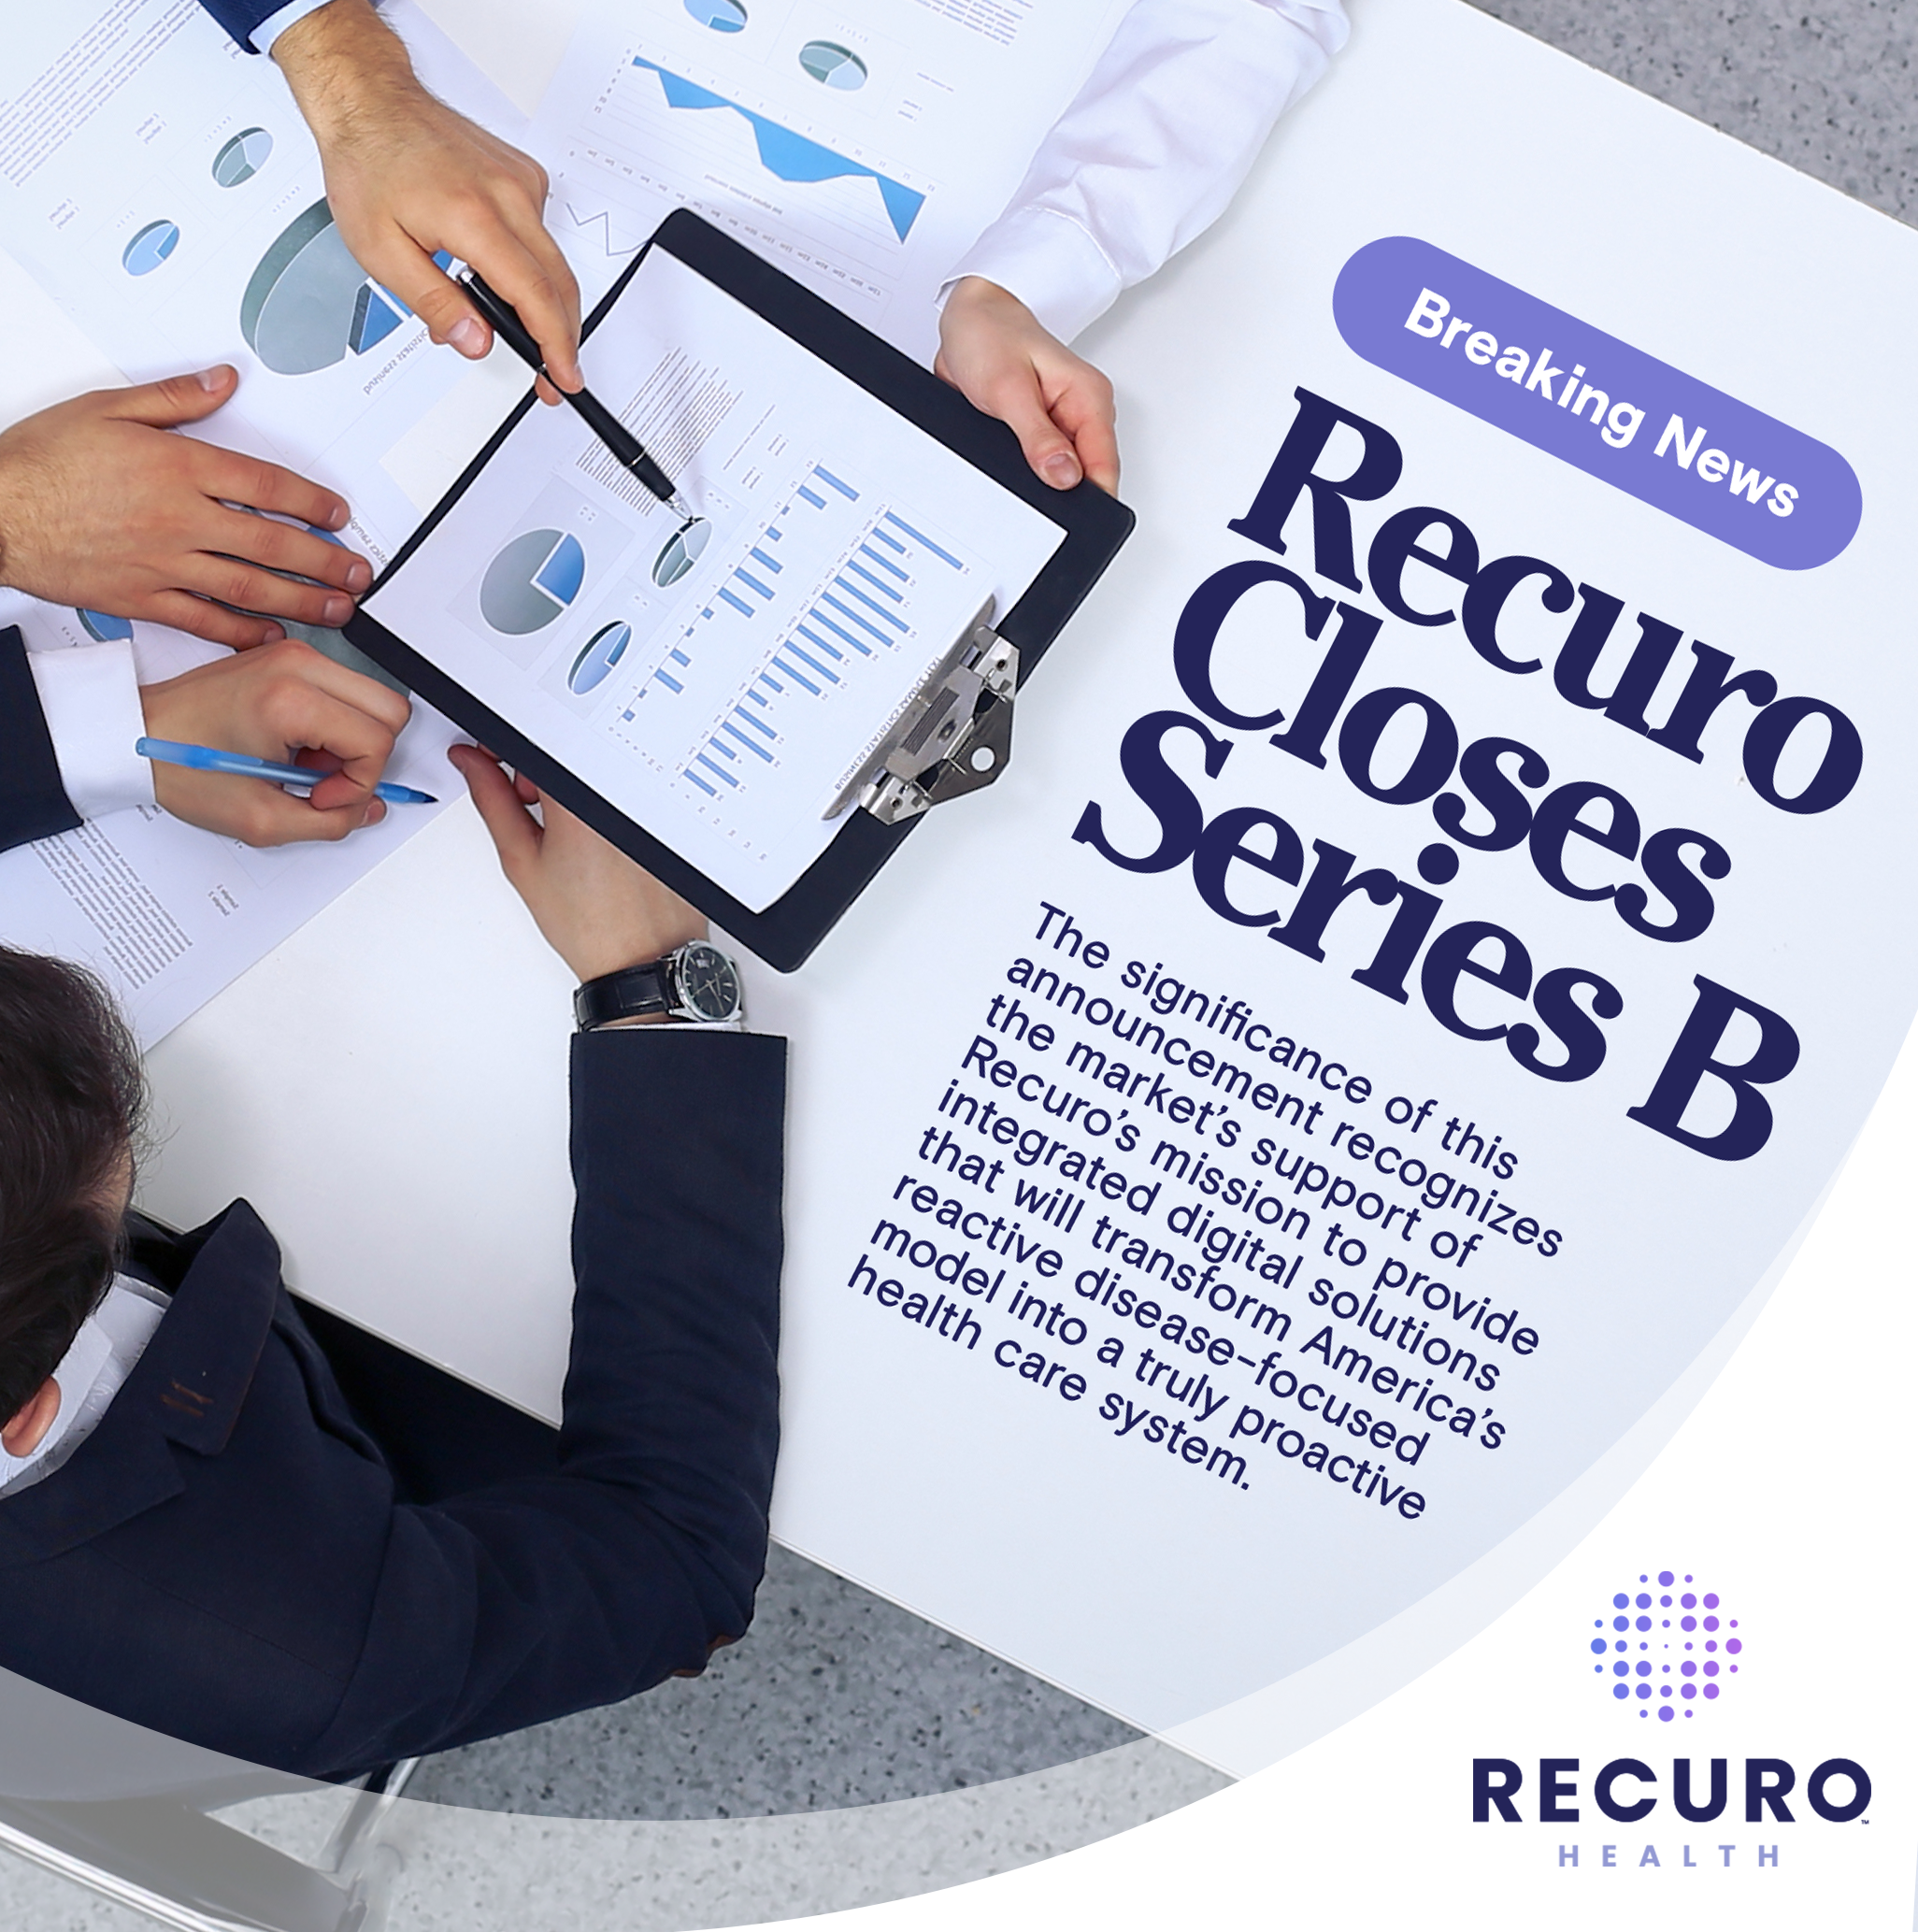 Recuro Health Closes $47 Million Series B Financing Led by Arch Ventures